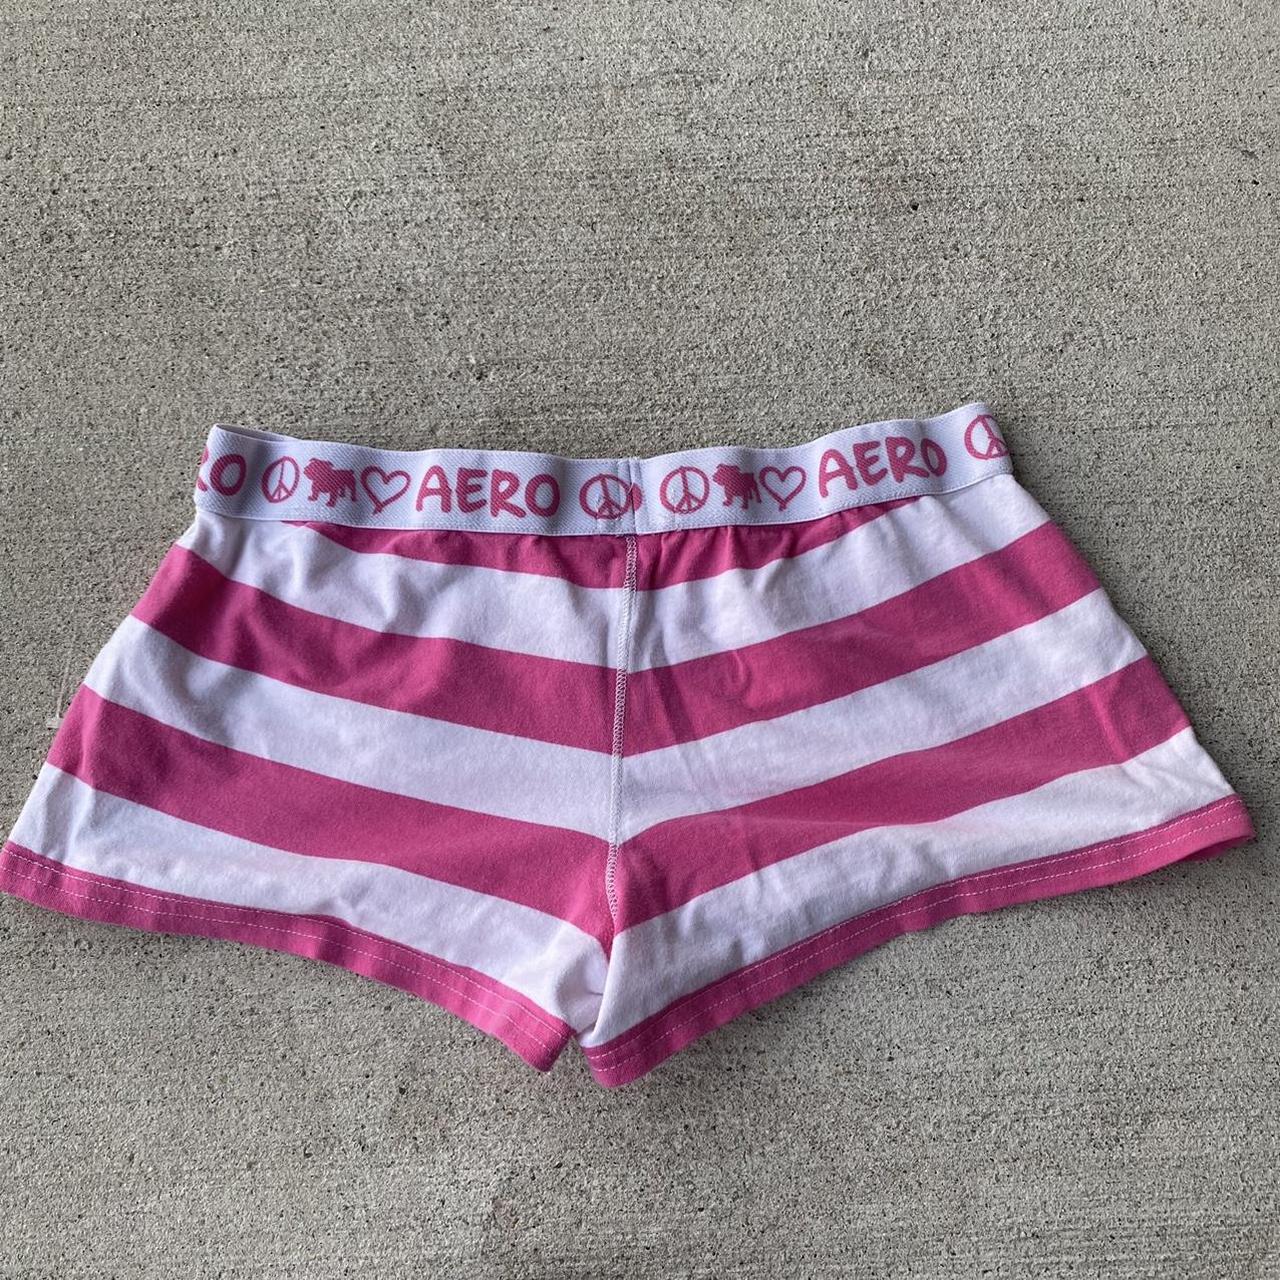 Aeropostale Women's Pink and White Shorts | Depop